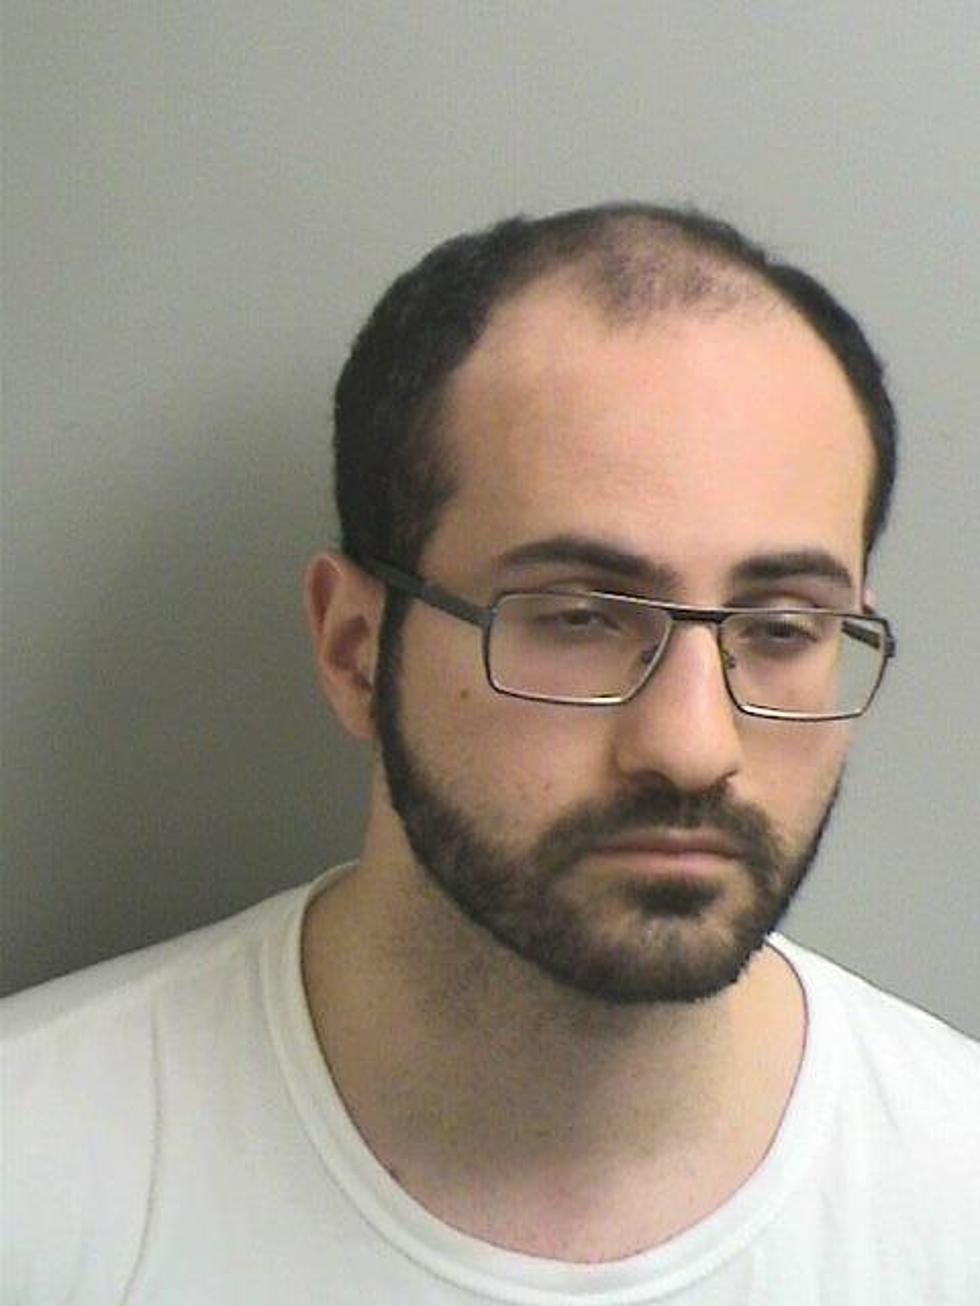 Lakewood man arrested for exposing himself to little girl in Toms River